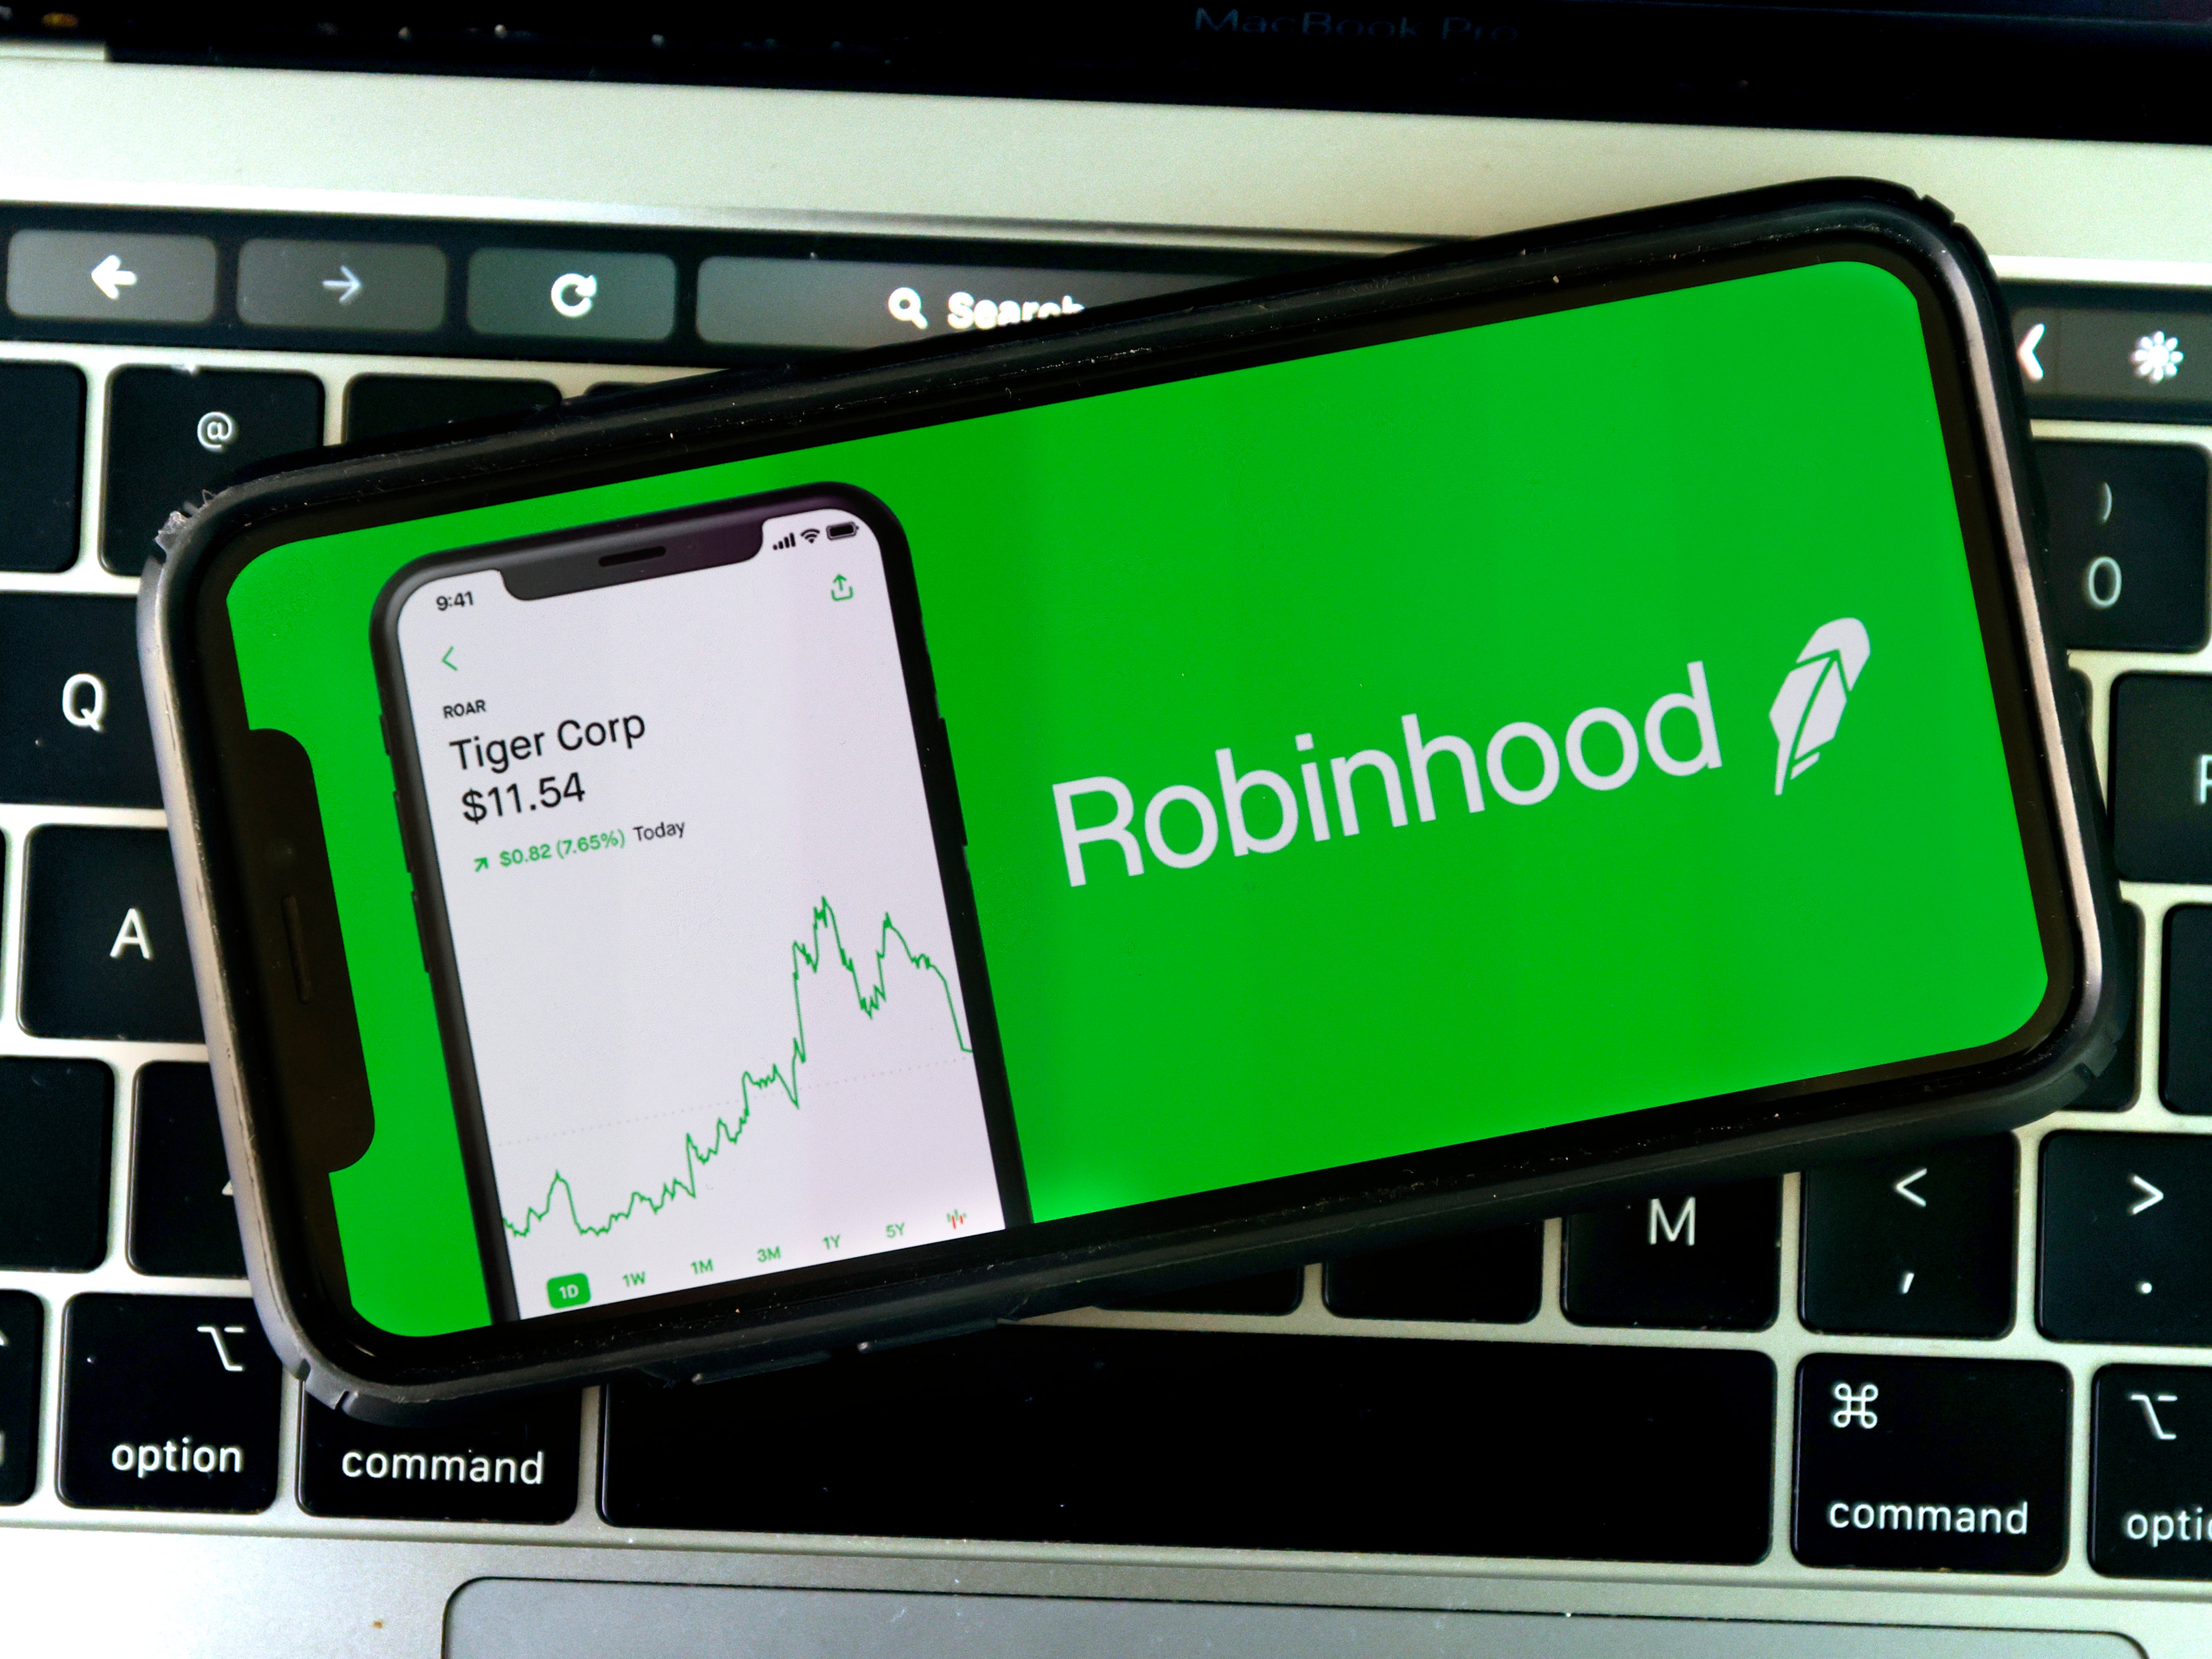 Robinhood faces $100M hit due to legal and regulatory challenges  (NASDAQ:HOOD)